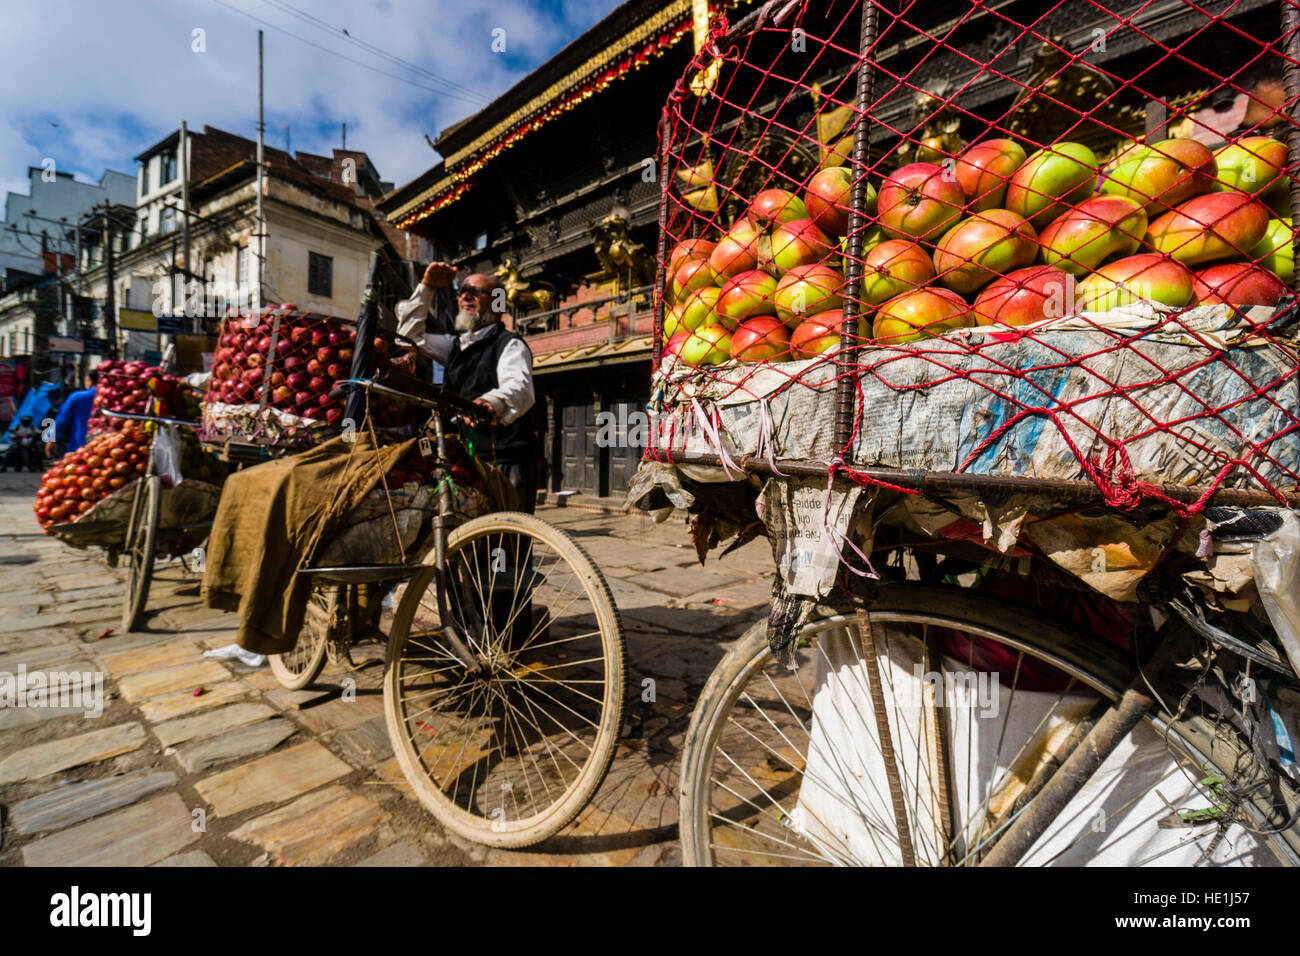 Fruit sellers, using bicycles, are offering apples and oranges on Indra Chowk in front of Akash Bhairab temple Stock Photo